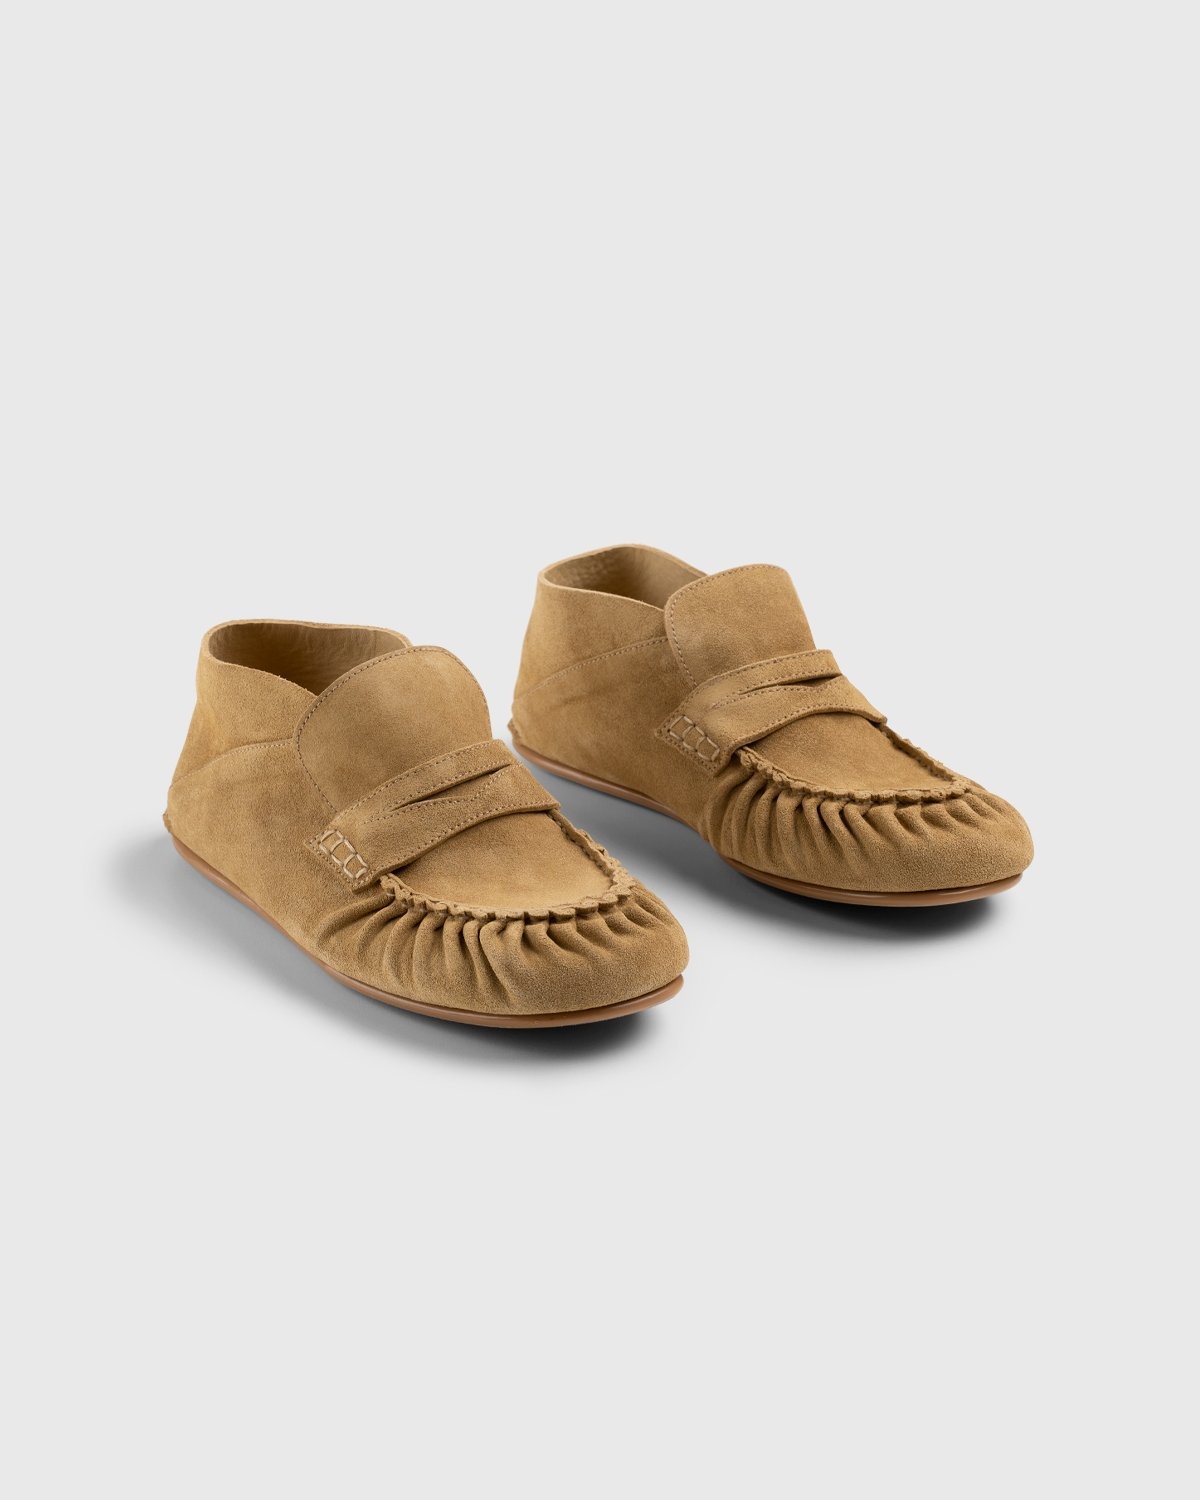 Loewe – Paula's Ibiza Suede Loafer Gold - Shoes - Brown - Image 4